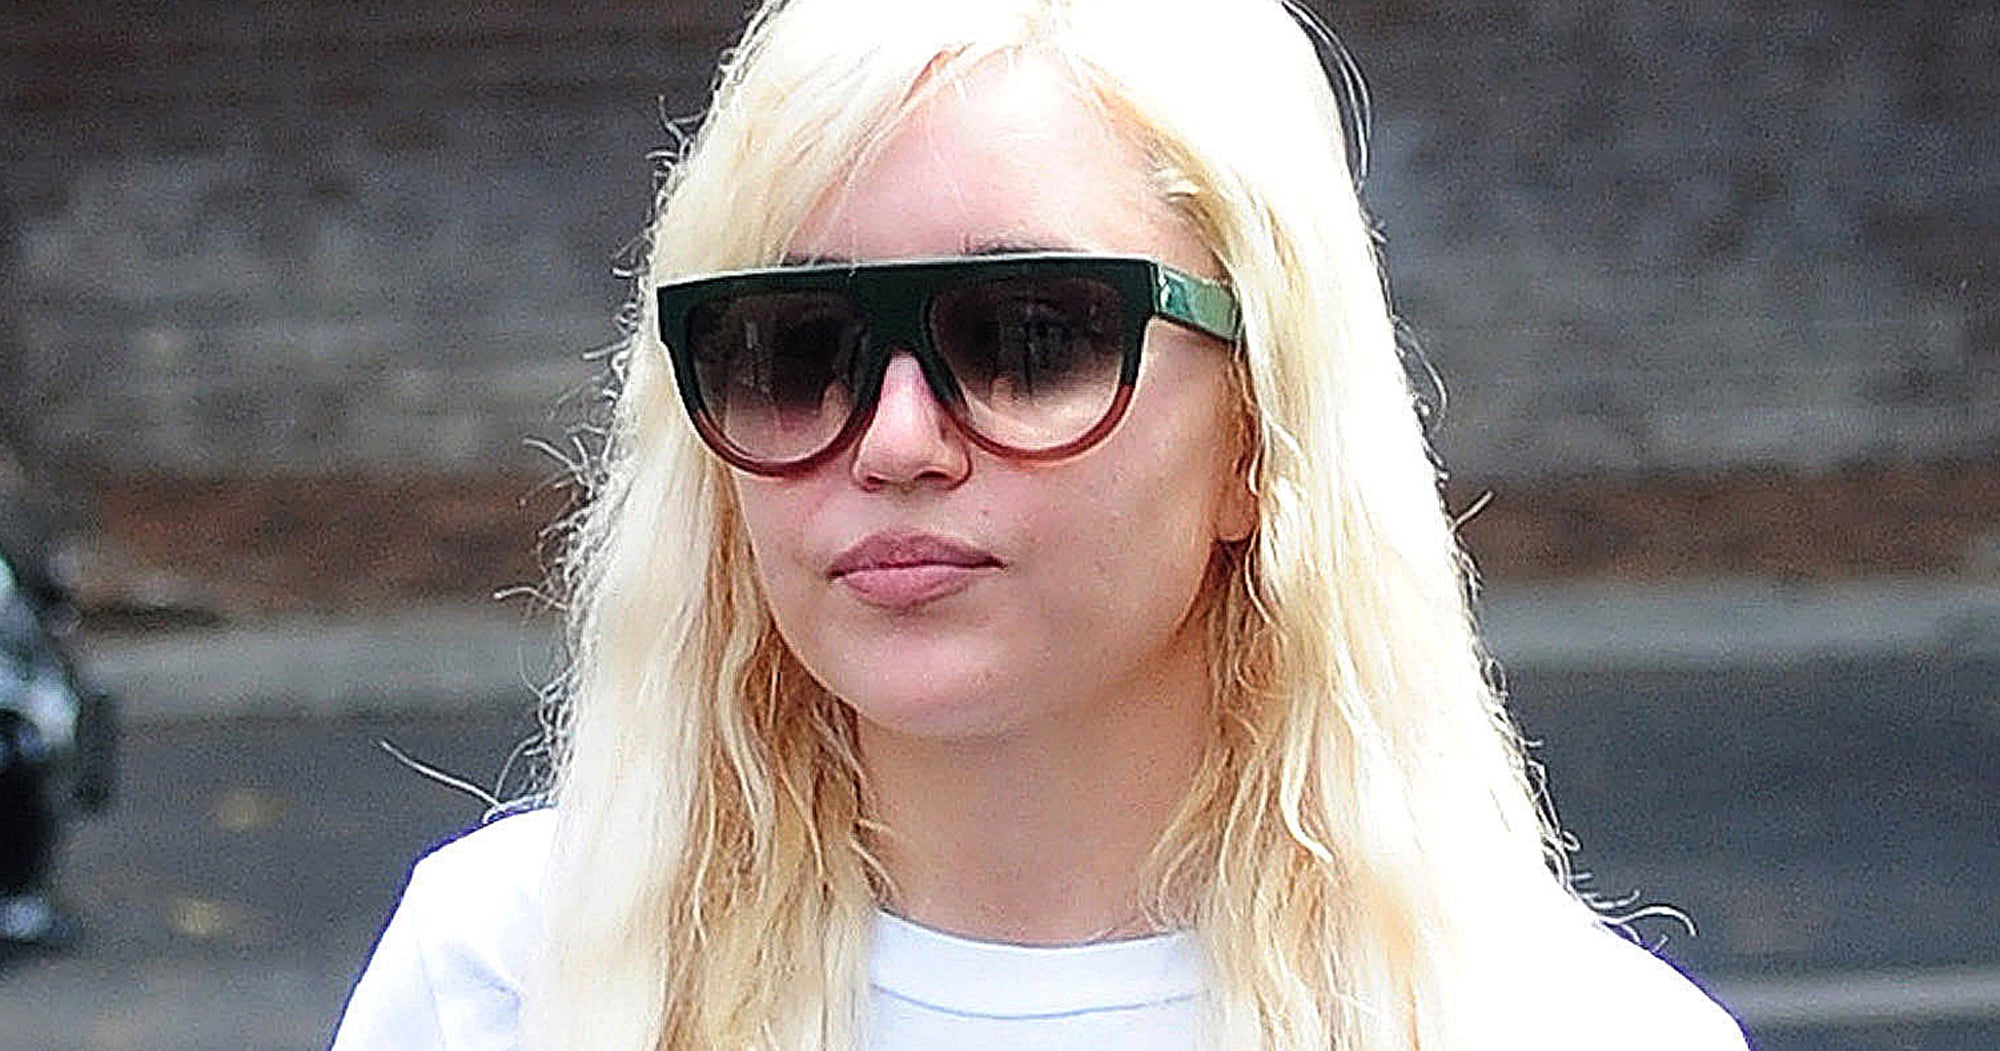 Amanda Bynes Appears To Have A New Face Tattoo On Insta